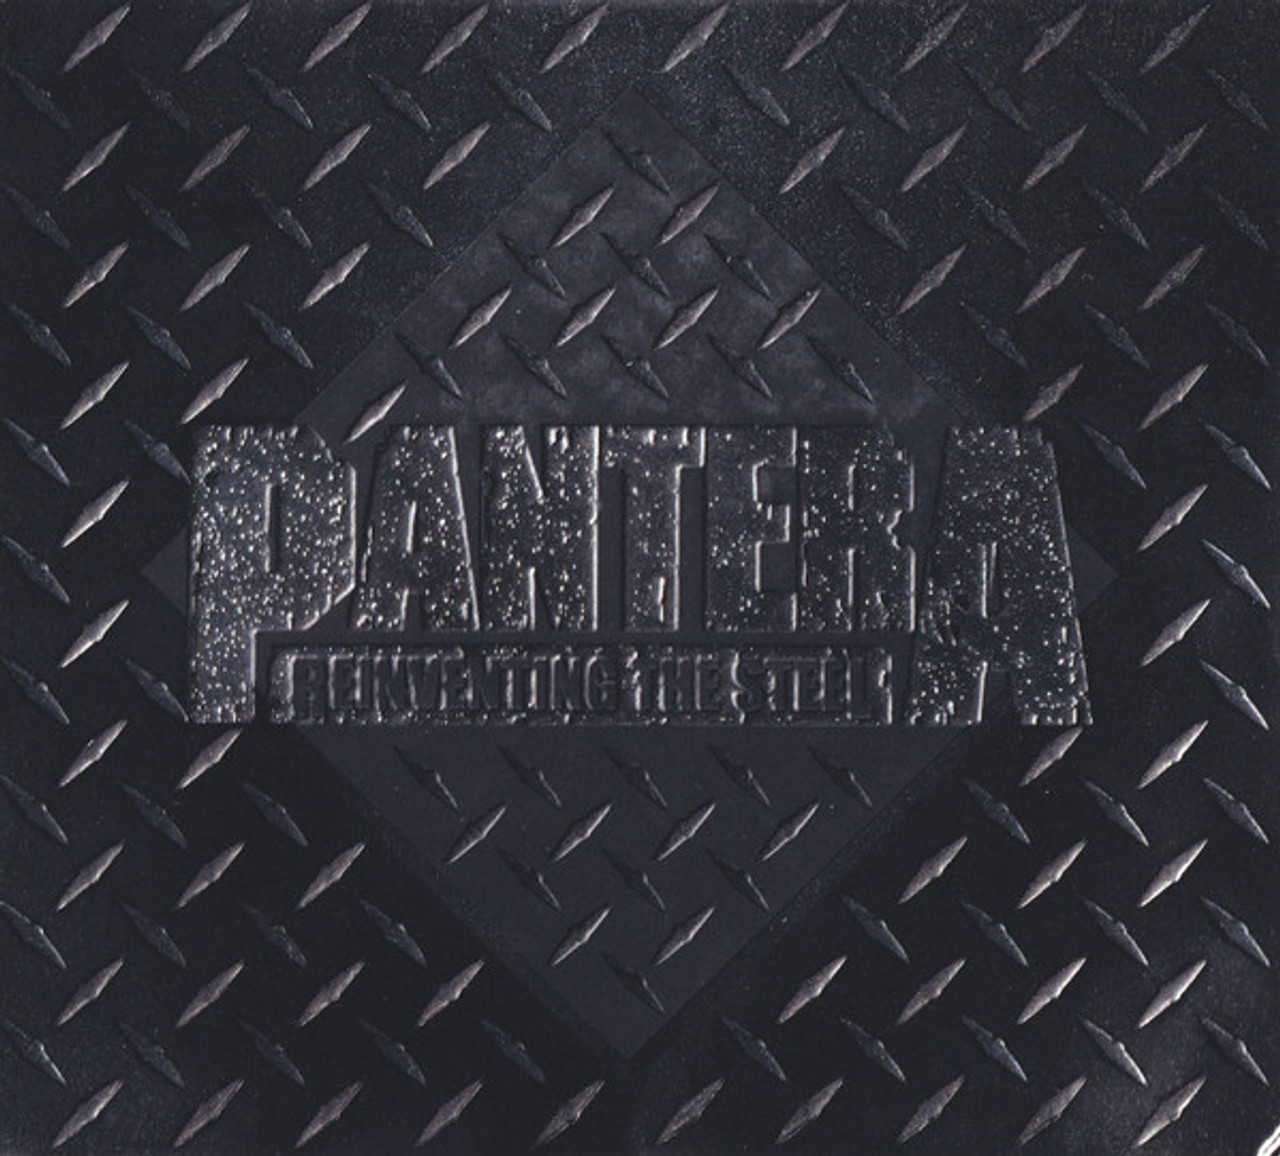 REINVENTING THE STEEL (20TH ANNIVERSARY) - PANTERA (#603497846382)